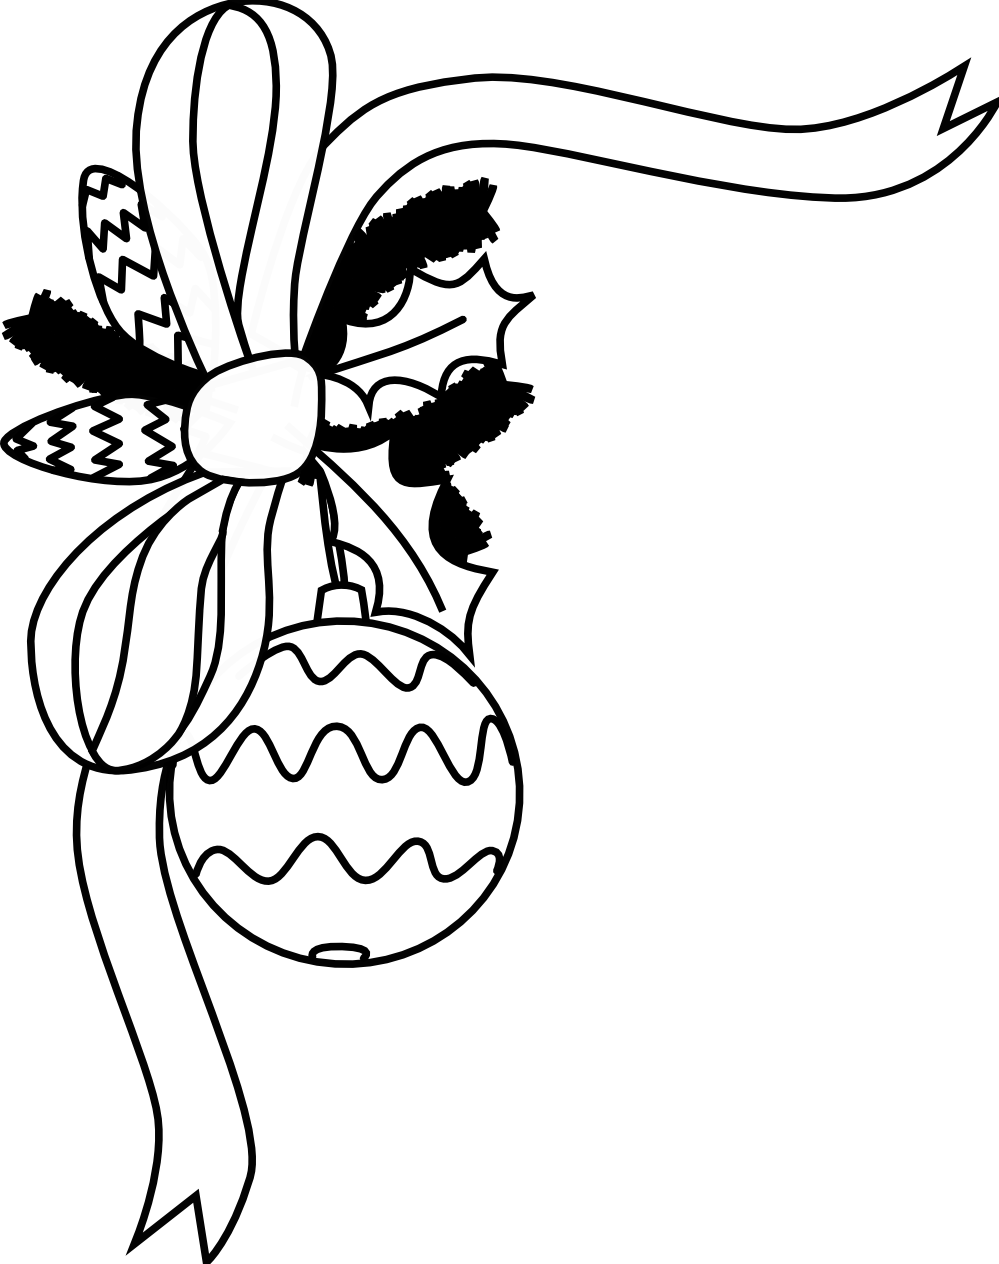 Black And White Clipart - ClipArt Best